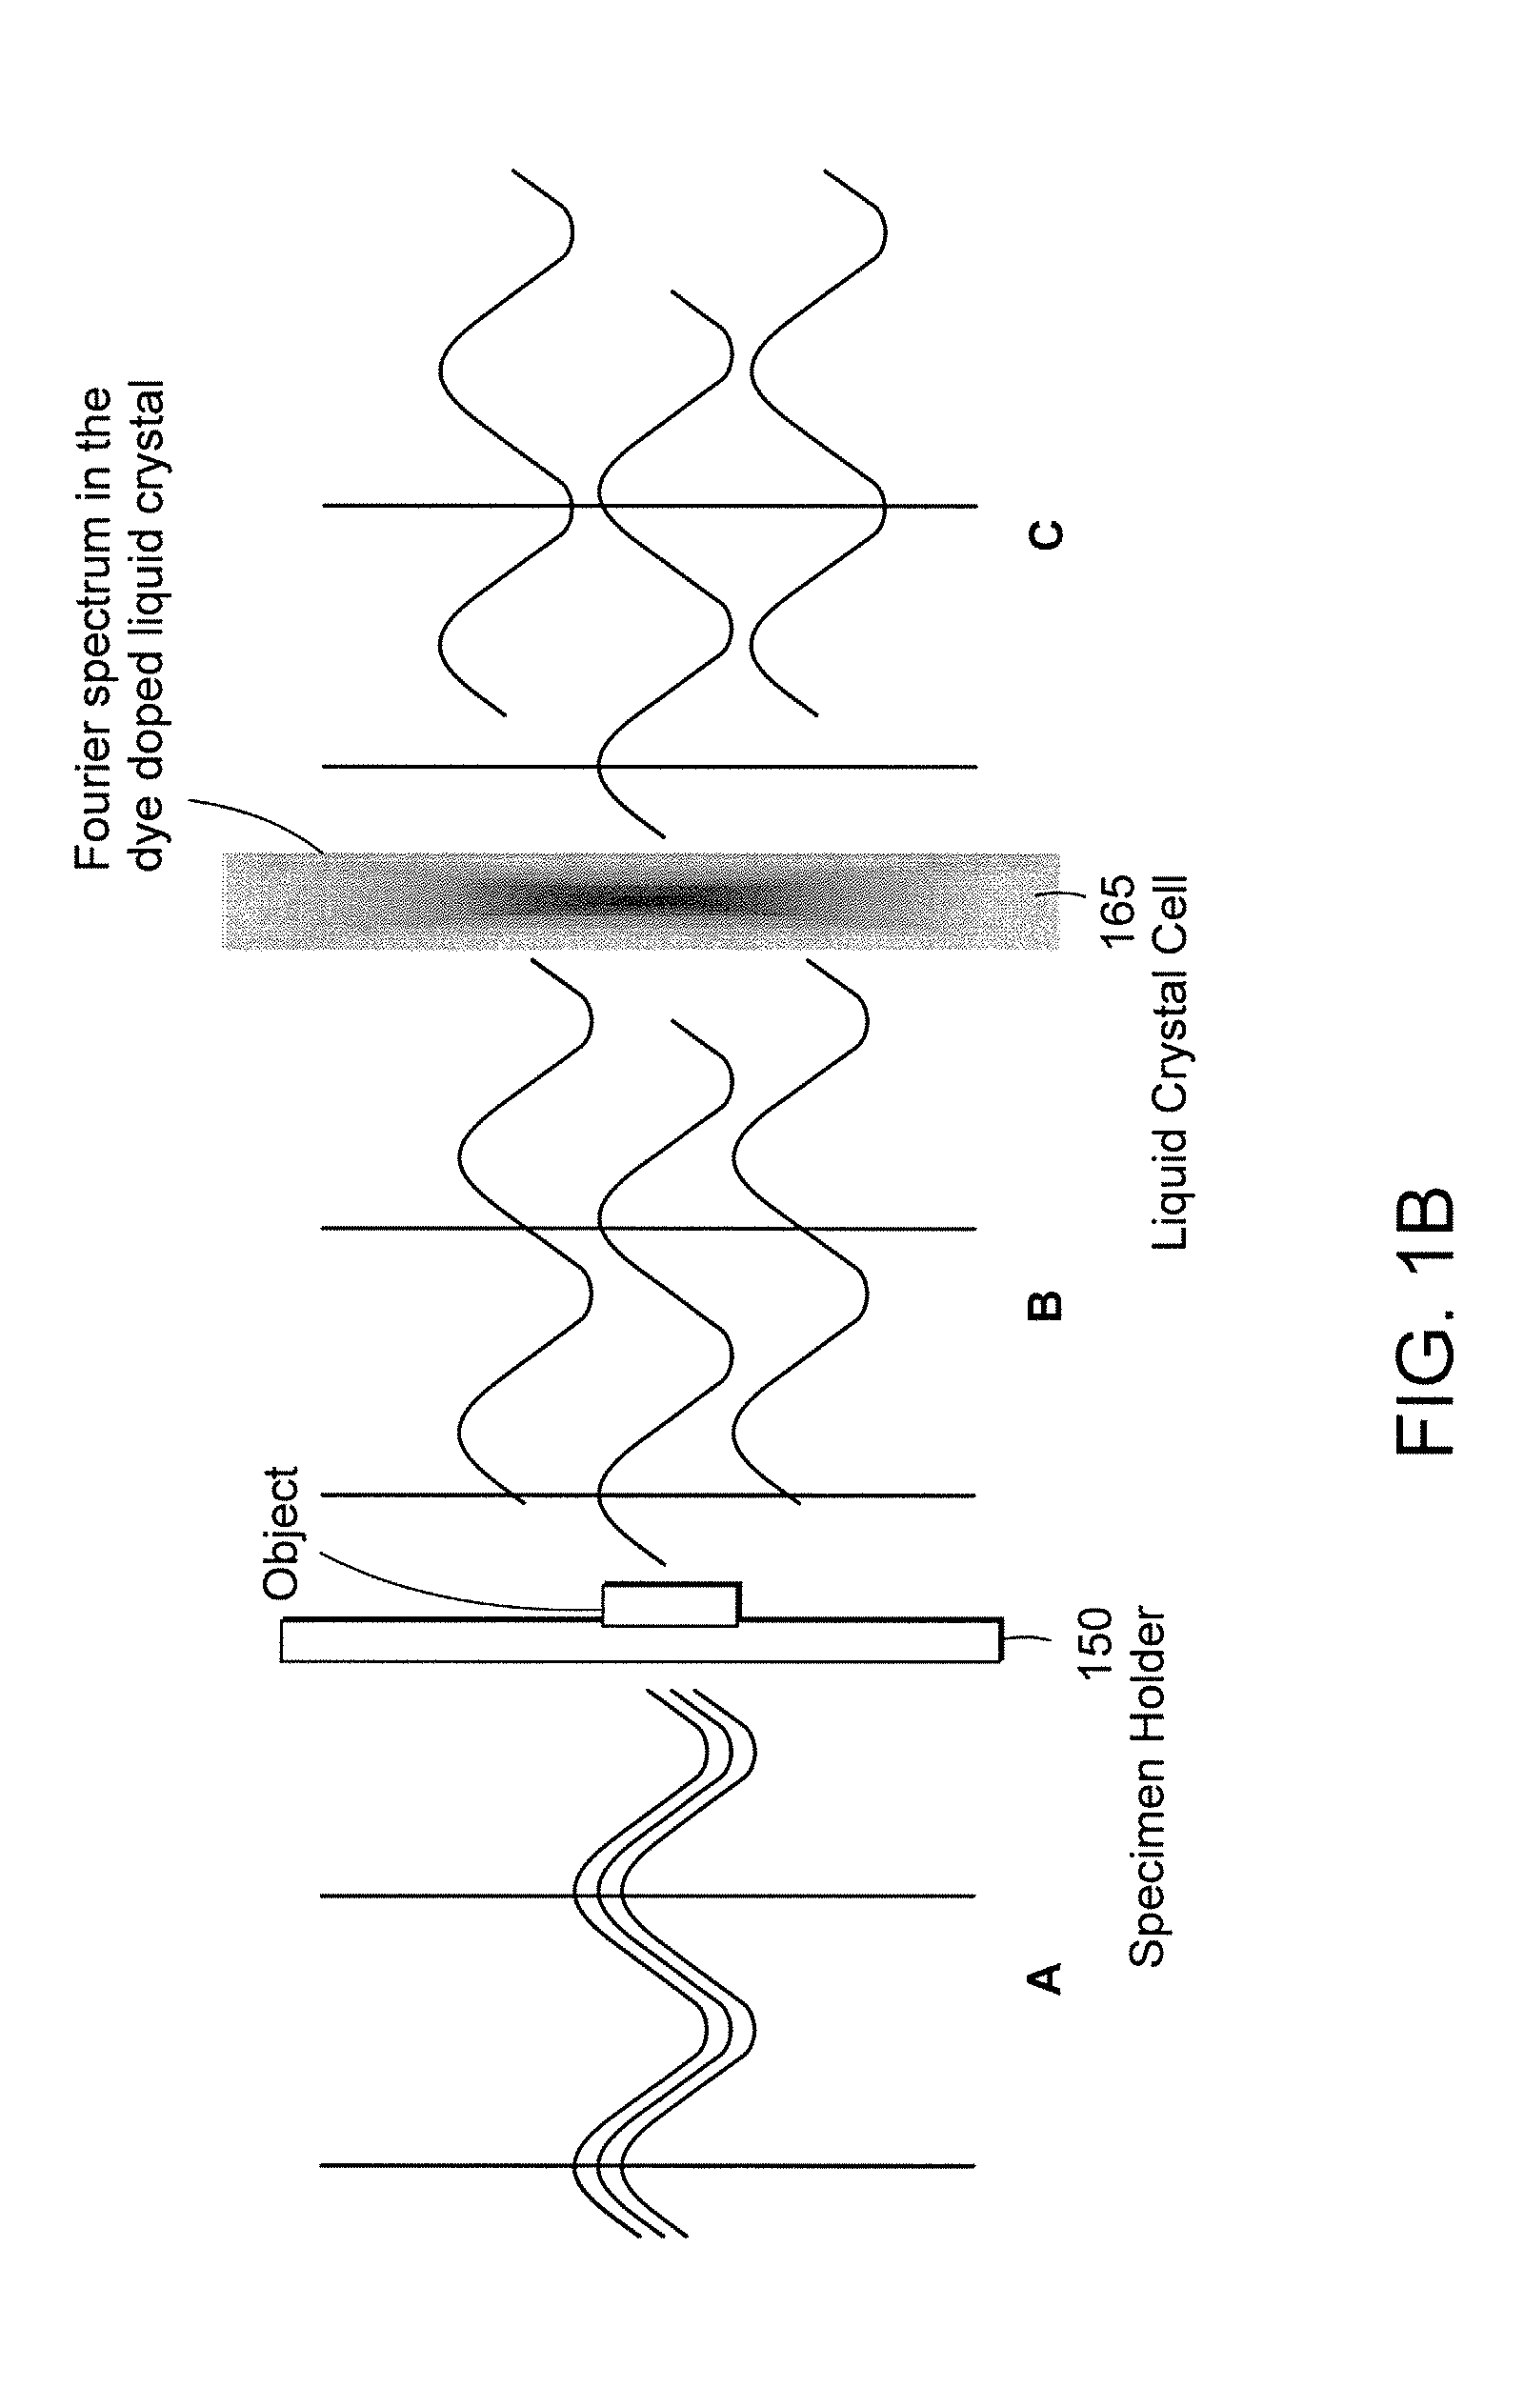 Systems and methods of all-optical Fourier phase contrast imaging using dye doped liquid crystals